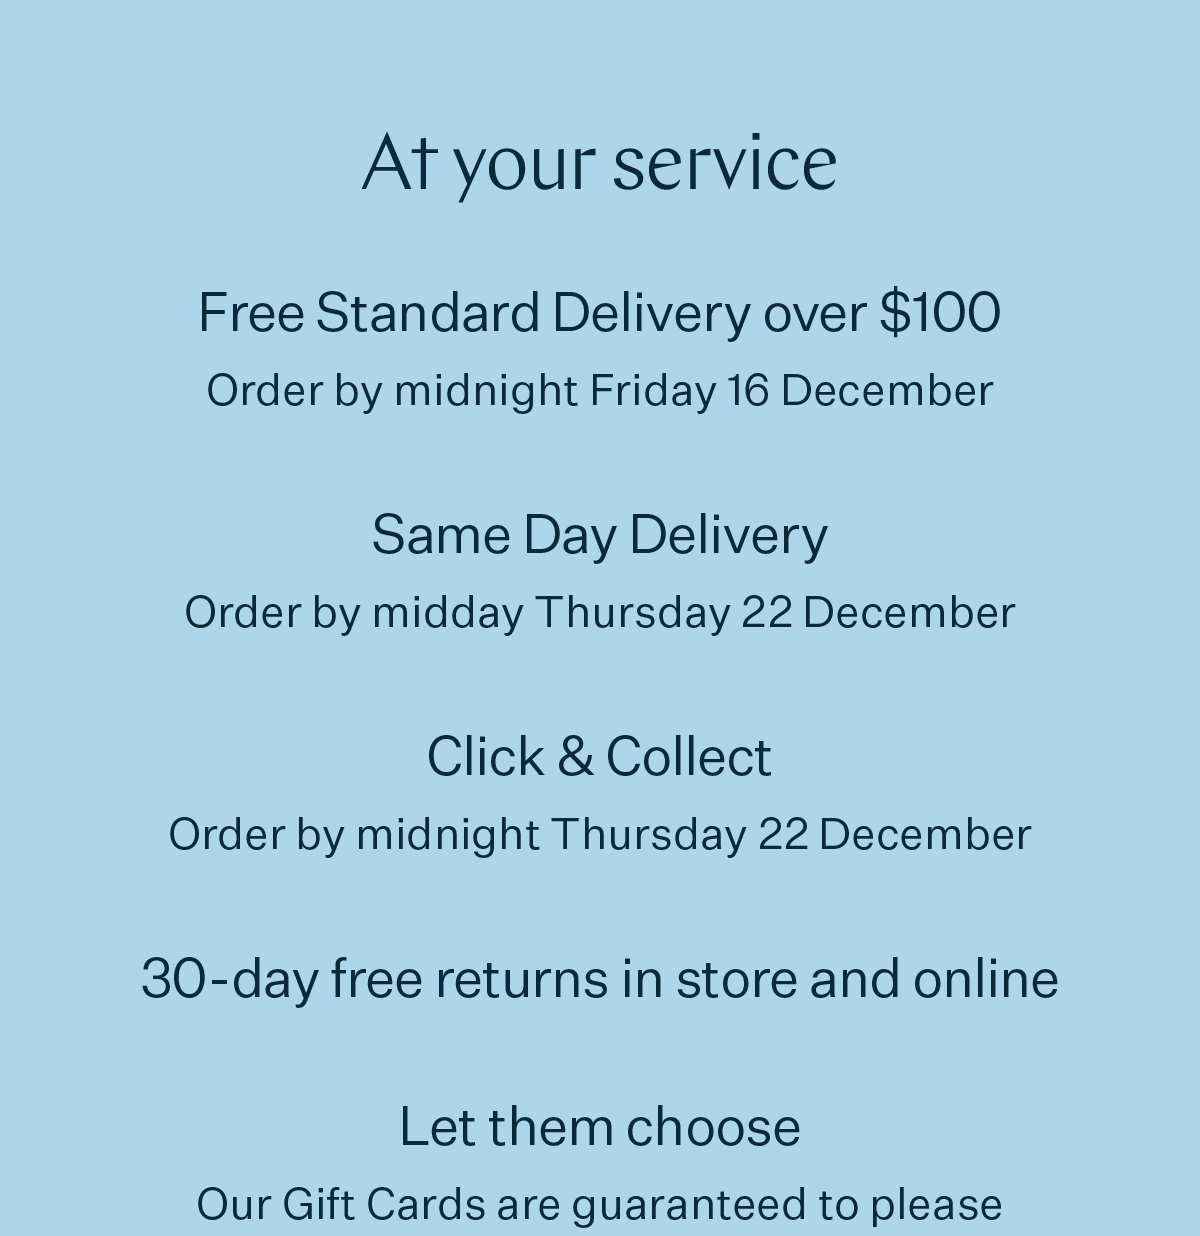 At your service | Free Standard Delivery over $100 Order by midnight Friday 16 December | Same Day Delivery Order by midday Thursday 22 December | Click & Collect Order by midnight Thursday 22 December | 30-day free returns in store and online | Let them choose Our Gift Cards are guaranteed to please